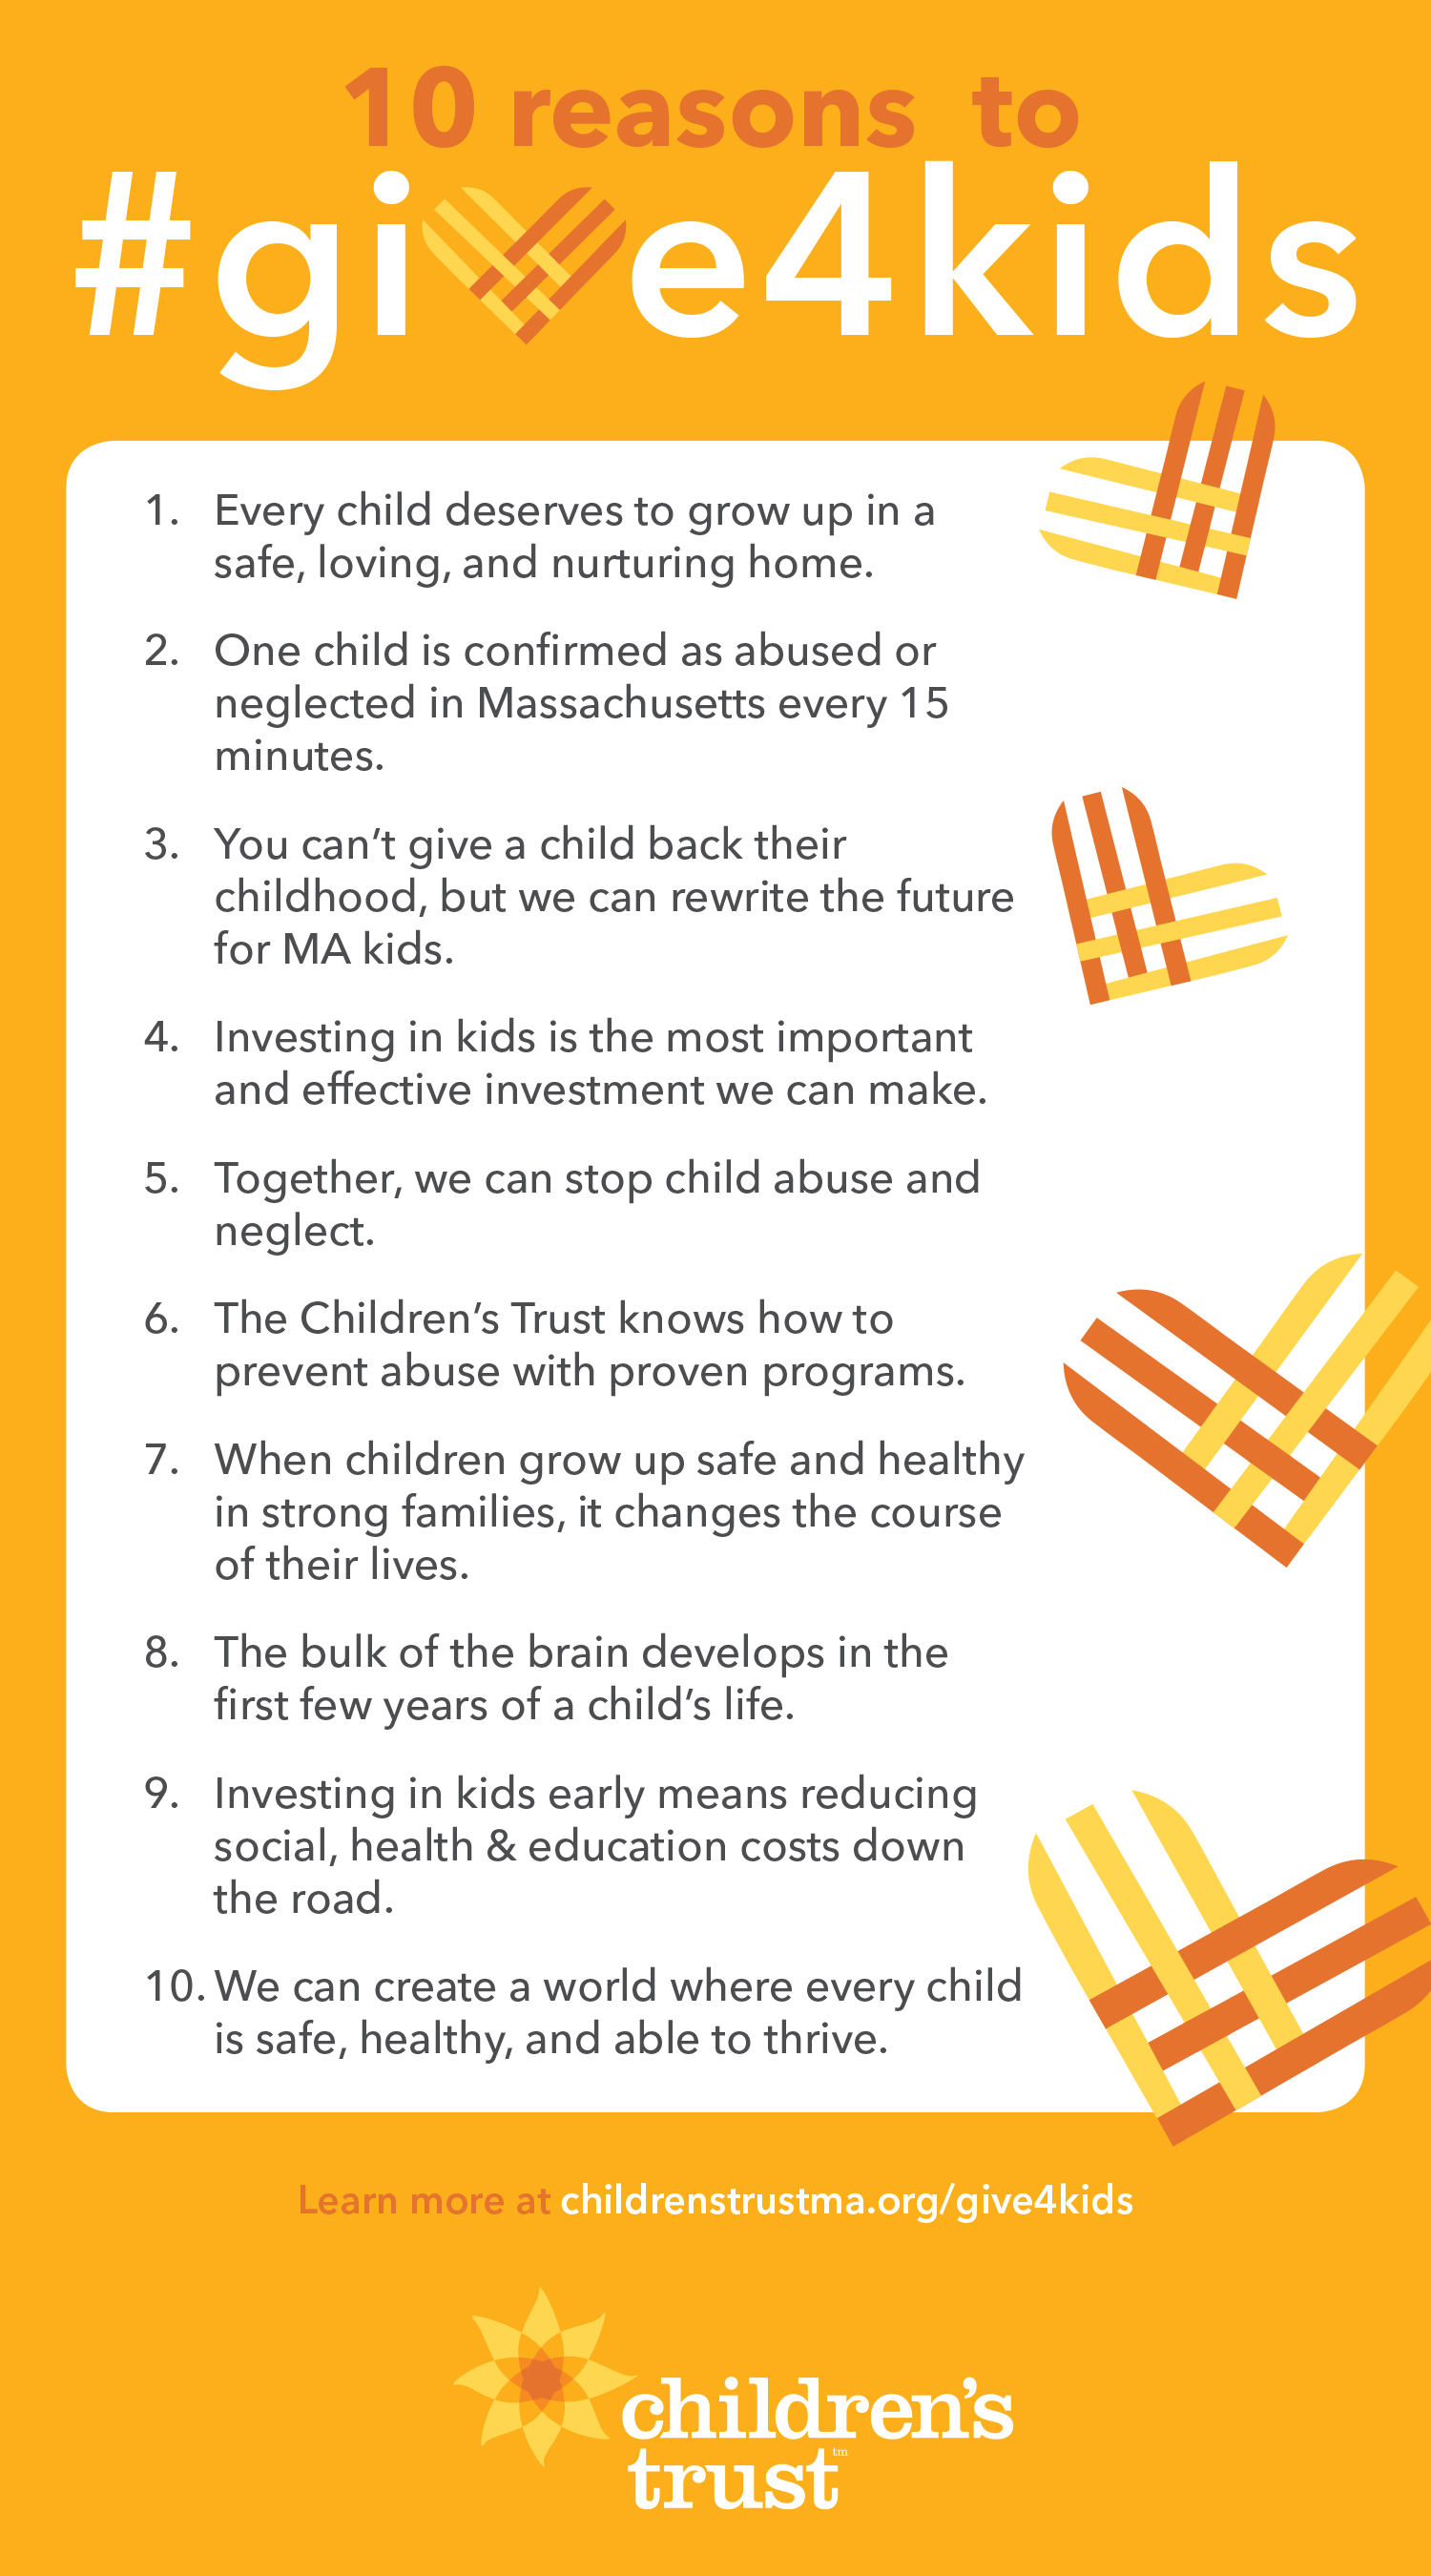 10 reasons to #give4kids